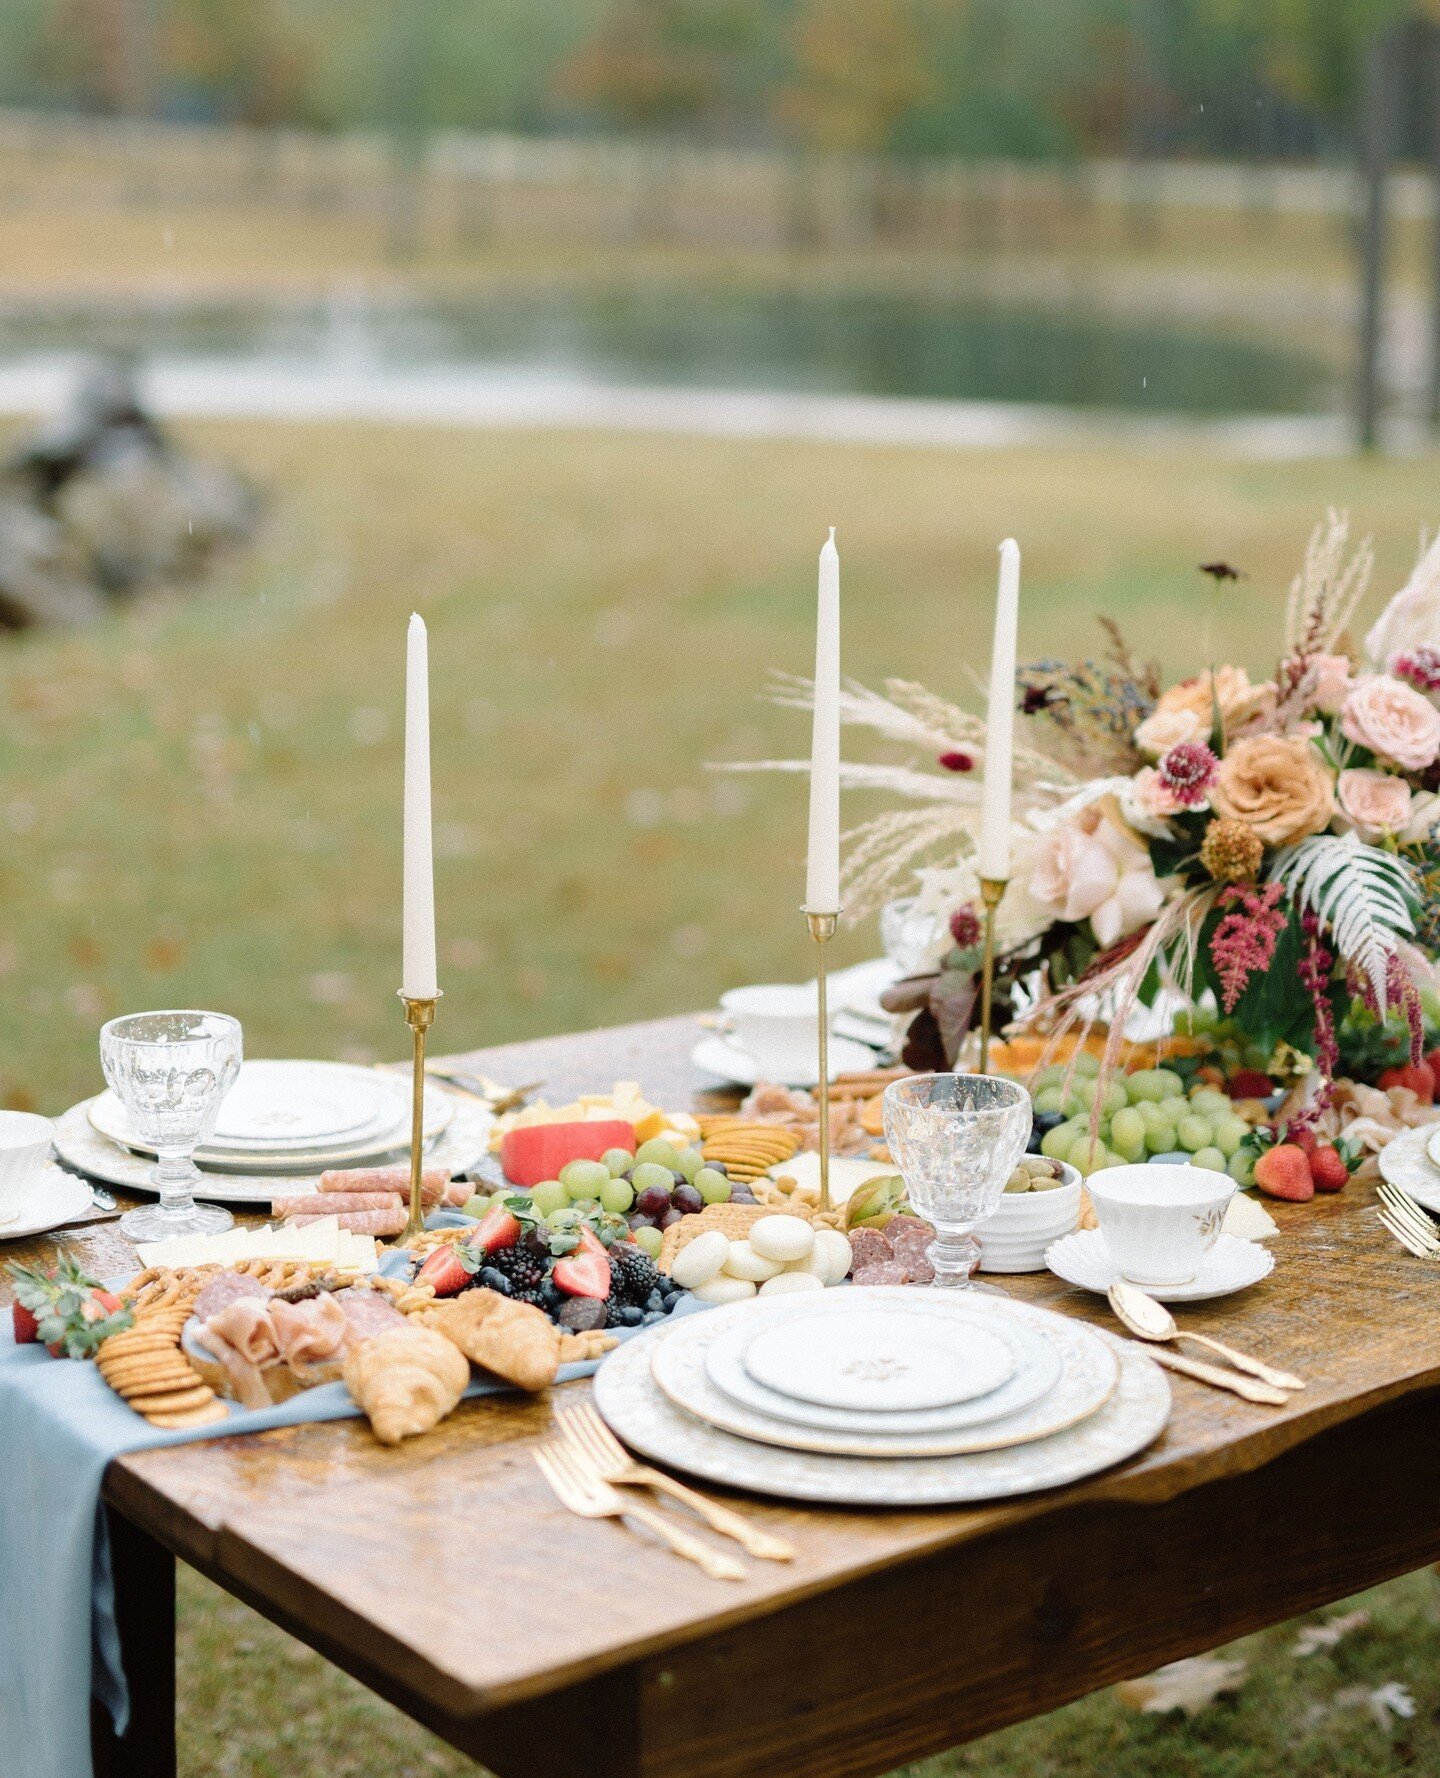 Happy Thanksgiving to you &amp; yours! We're so thankful for all of our amazing clients⁠ we've had the pleasure of serving this year. We hope you all have a wonderful day with good food &amp; good company 😋⁠
⁠
Planner: @threefoldevents⁠
Photographer